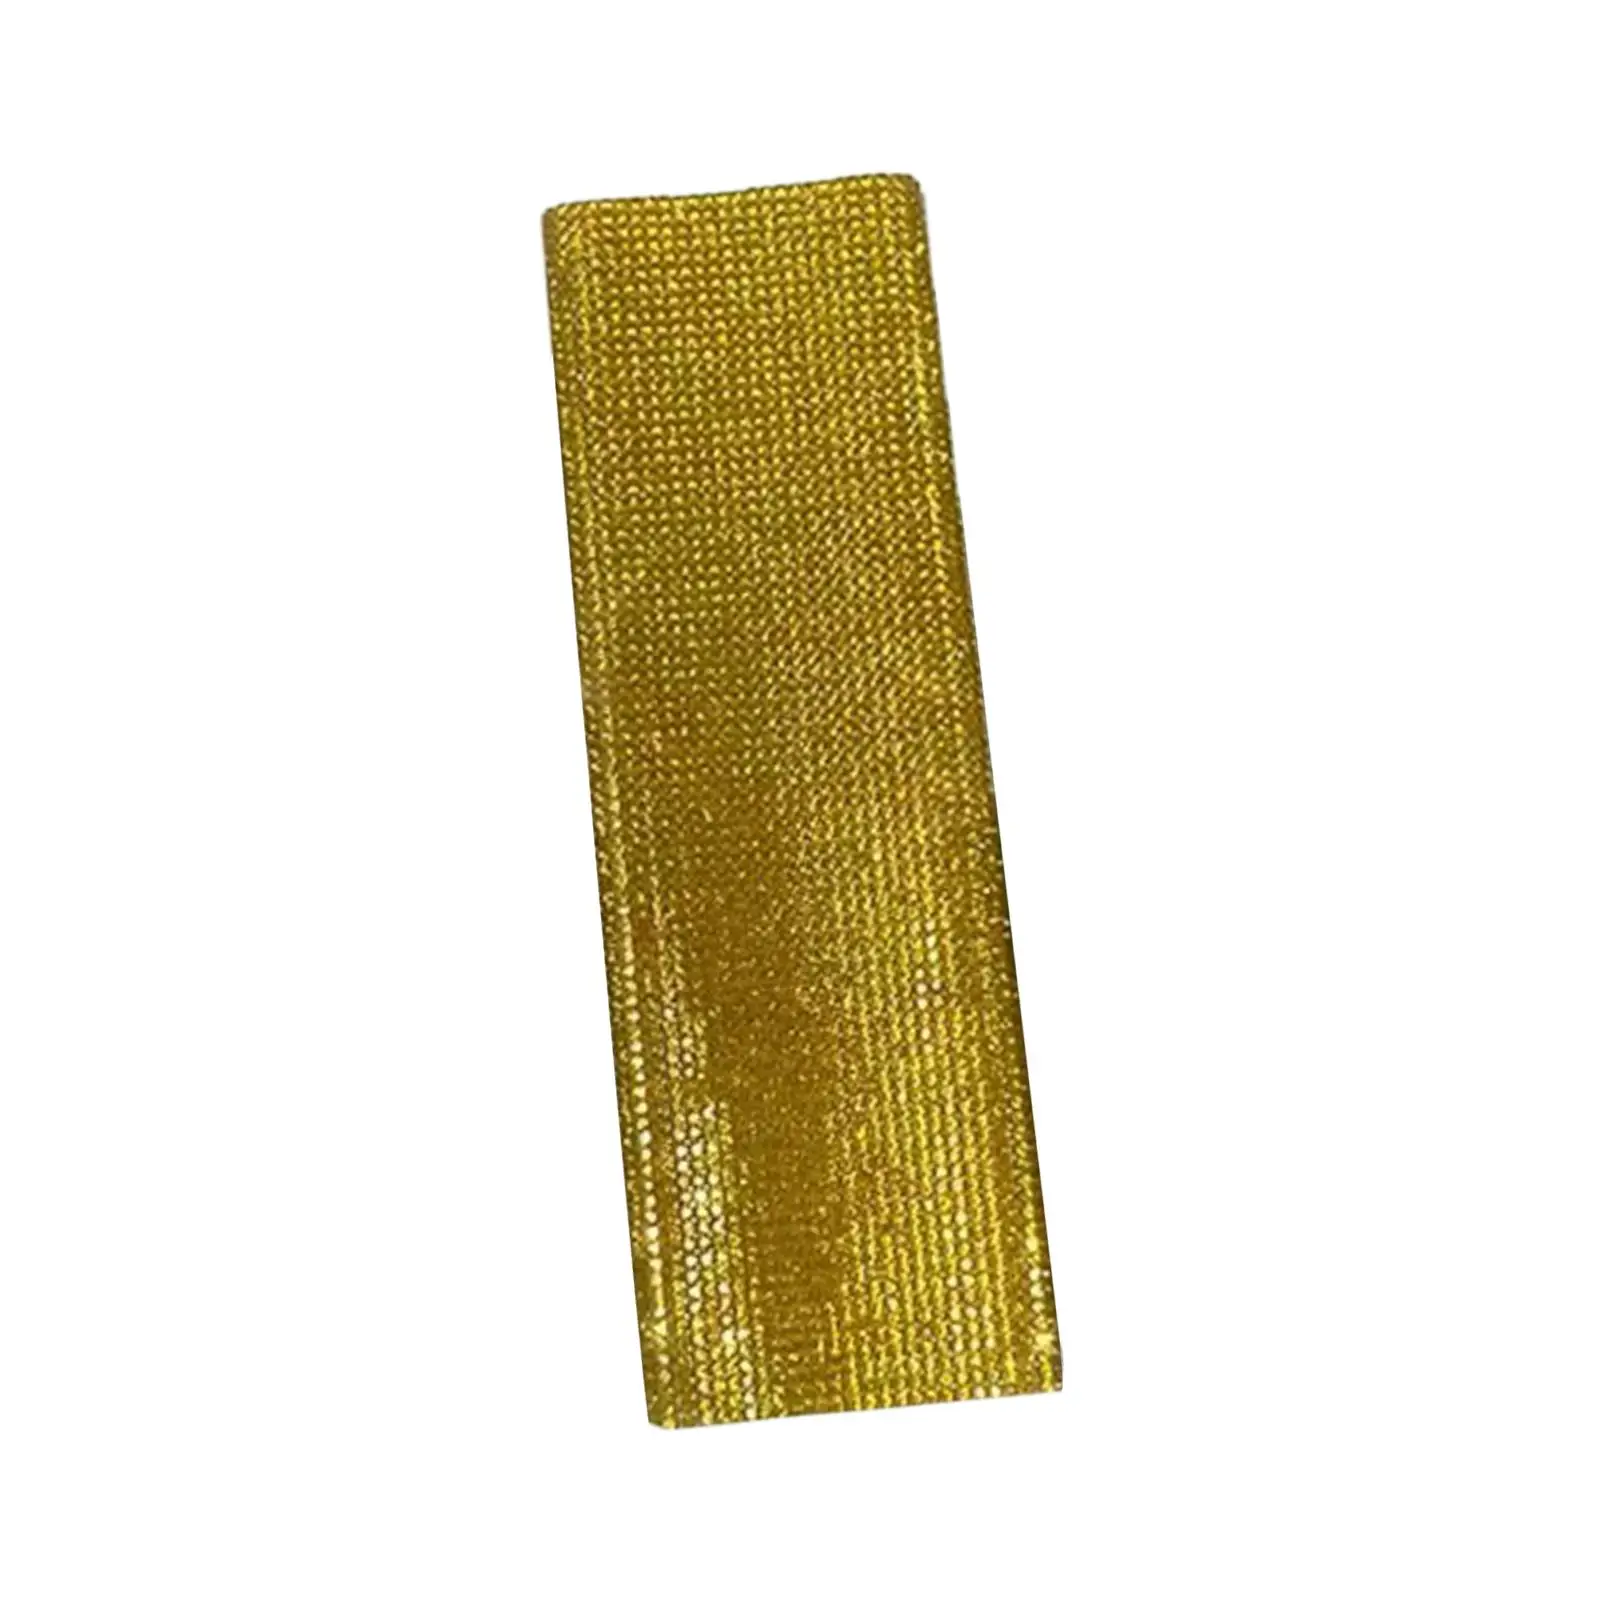 Glitter Microphone Handle Sleeve Decorative Mic Cover for Studio Show Party